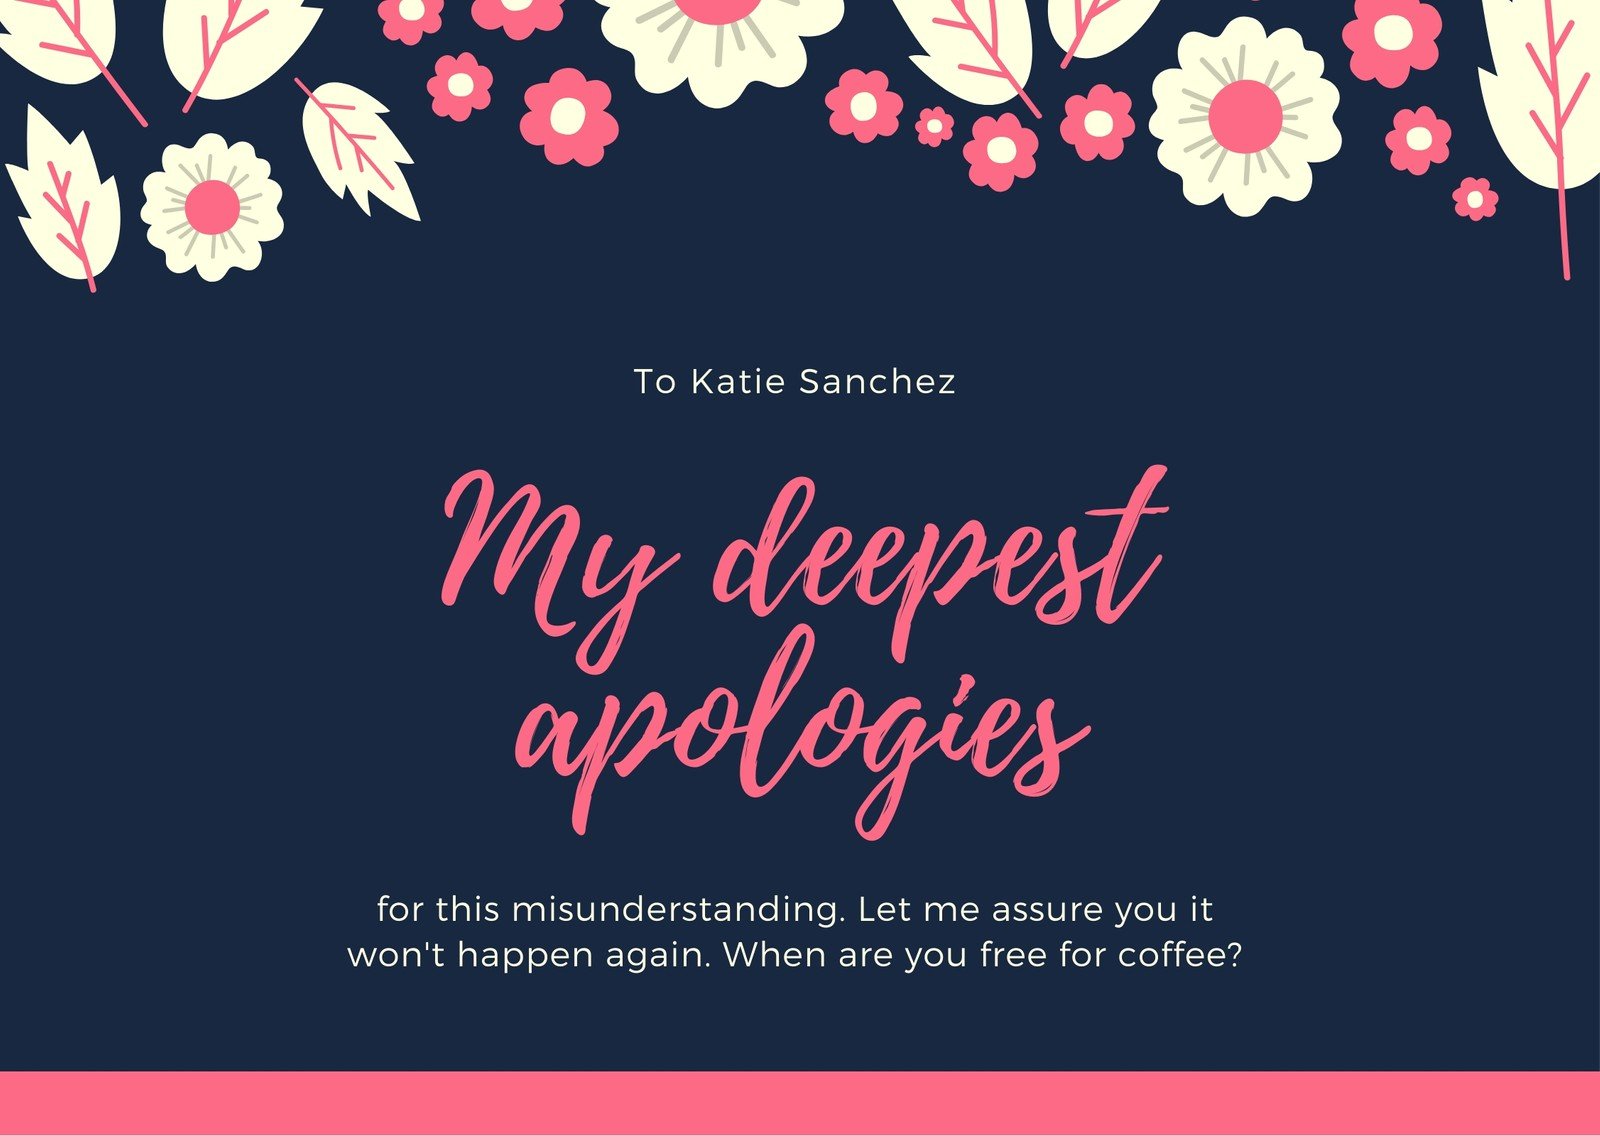 business apology cards 2